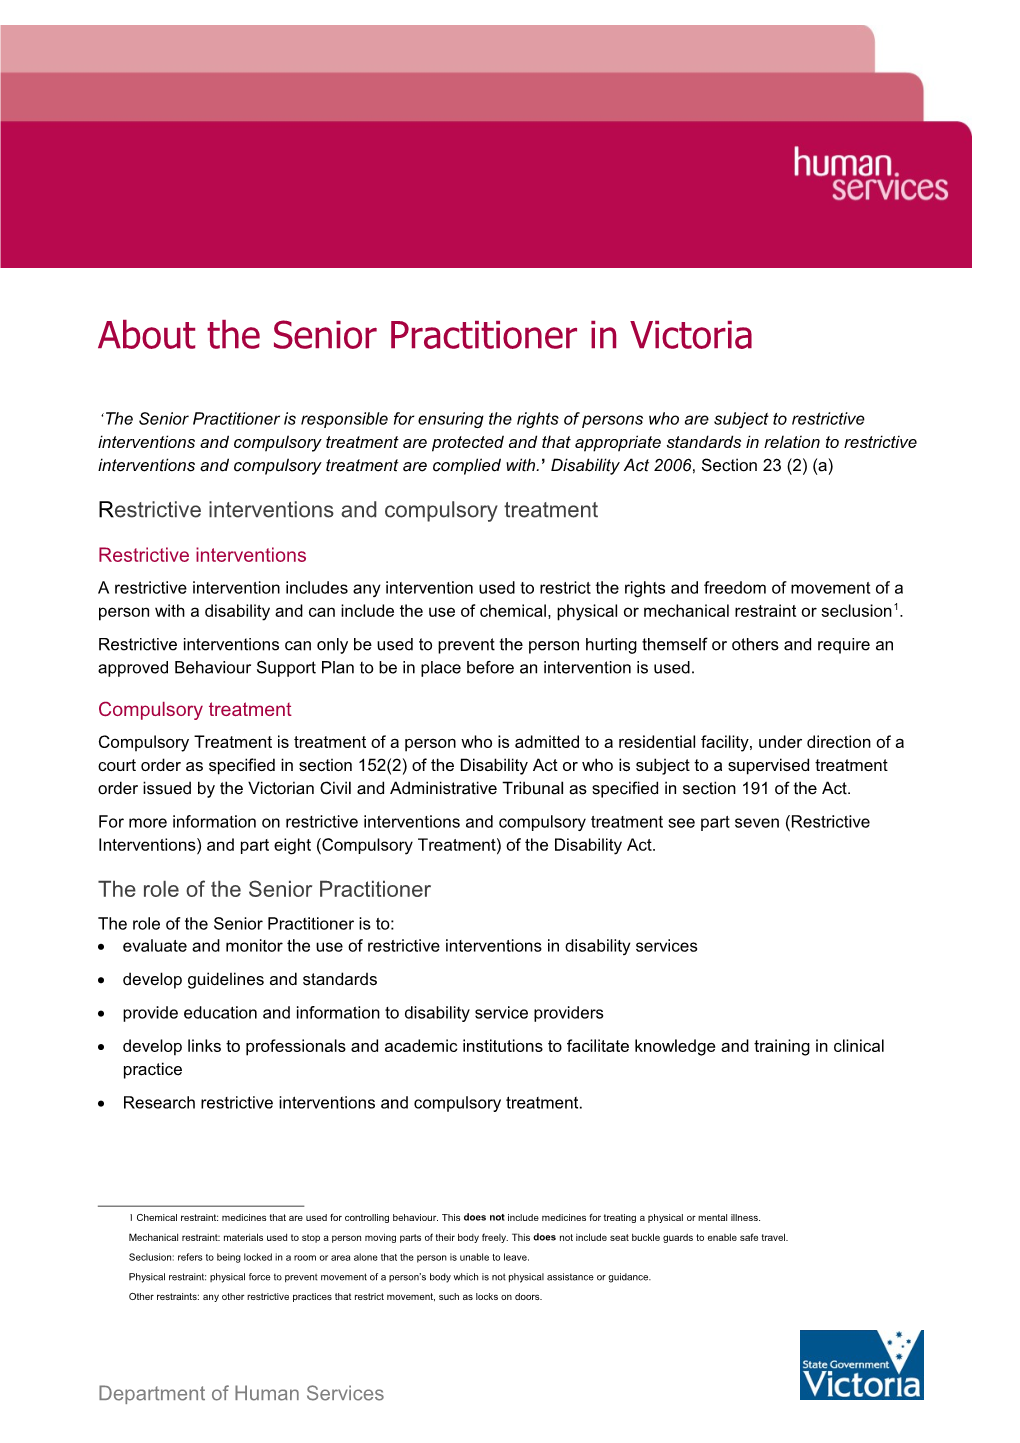 About The Senior Practitioner In Victoria